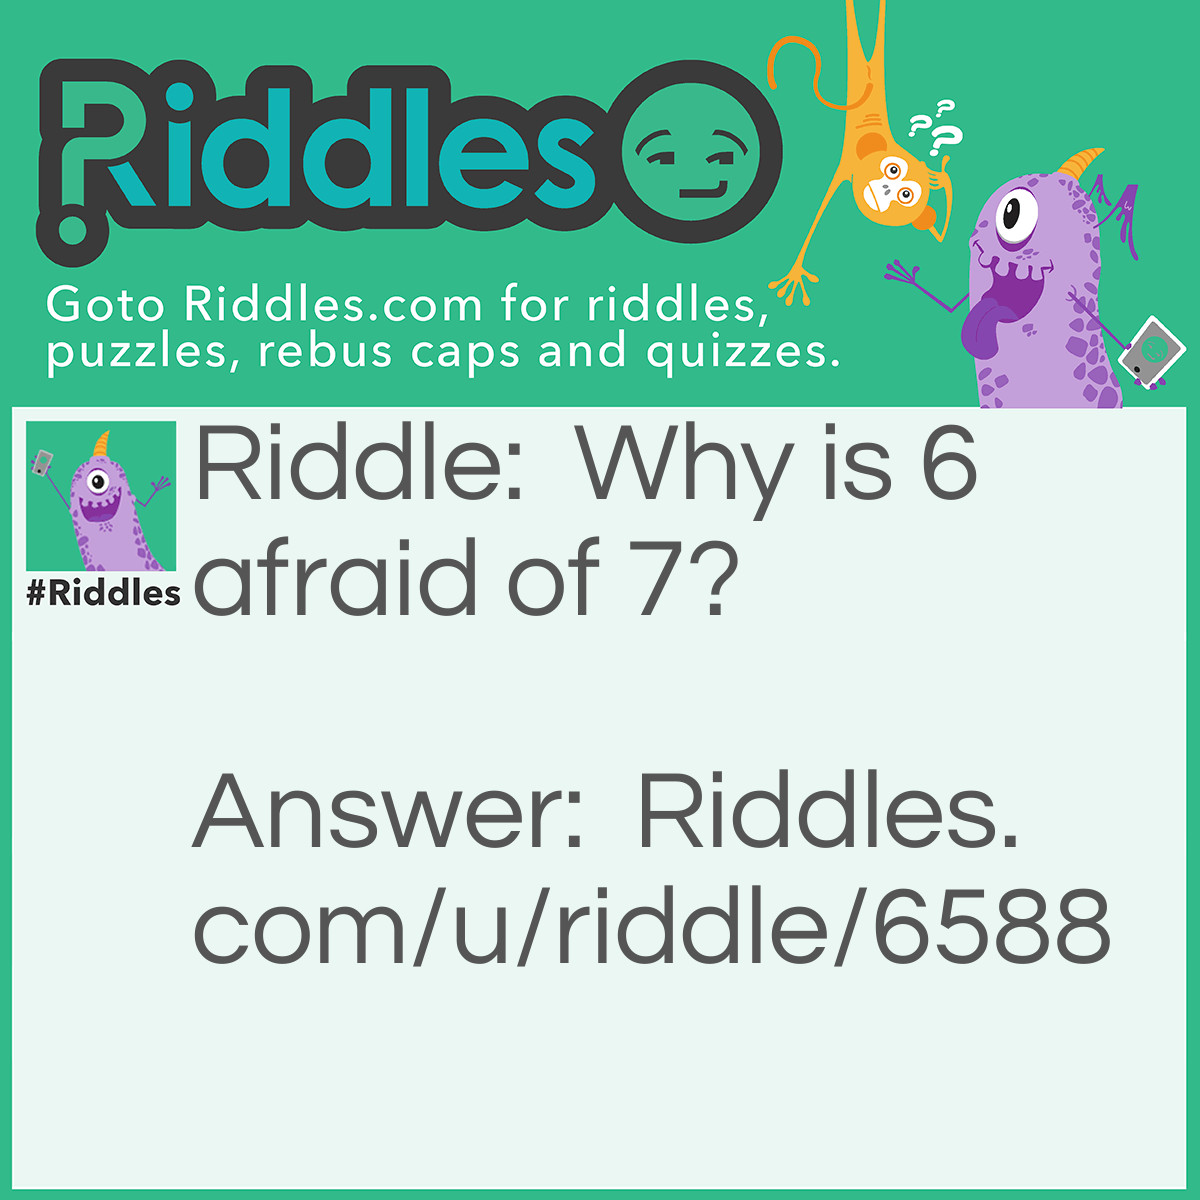 Riddle: Why is 6 afraid of 7? Answer: Because 7 8 9 (seven 'ate' nine)